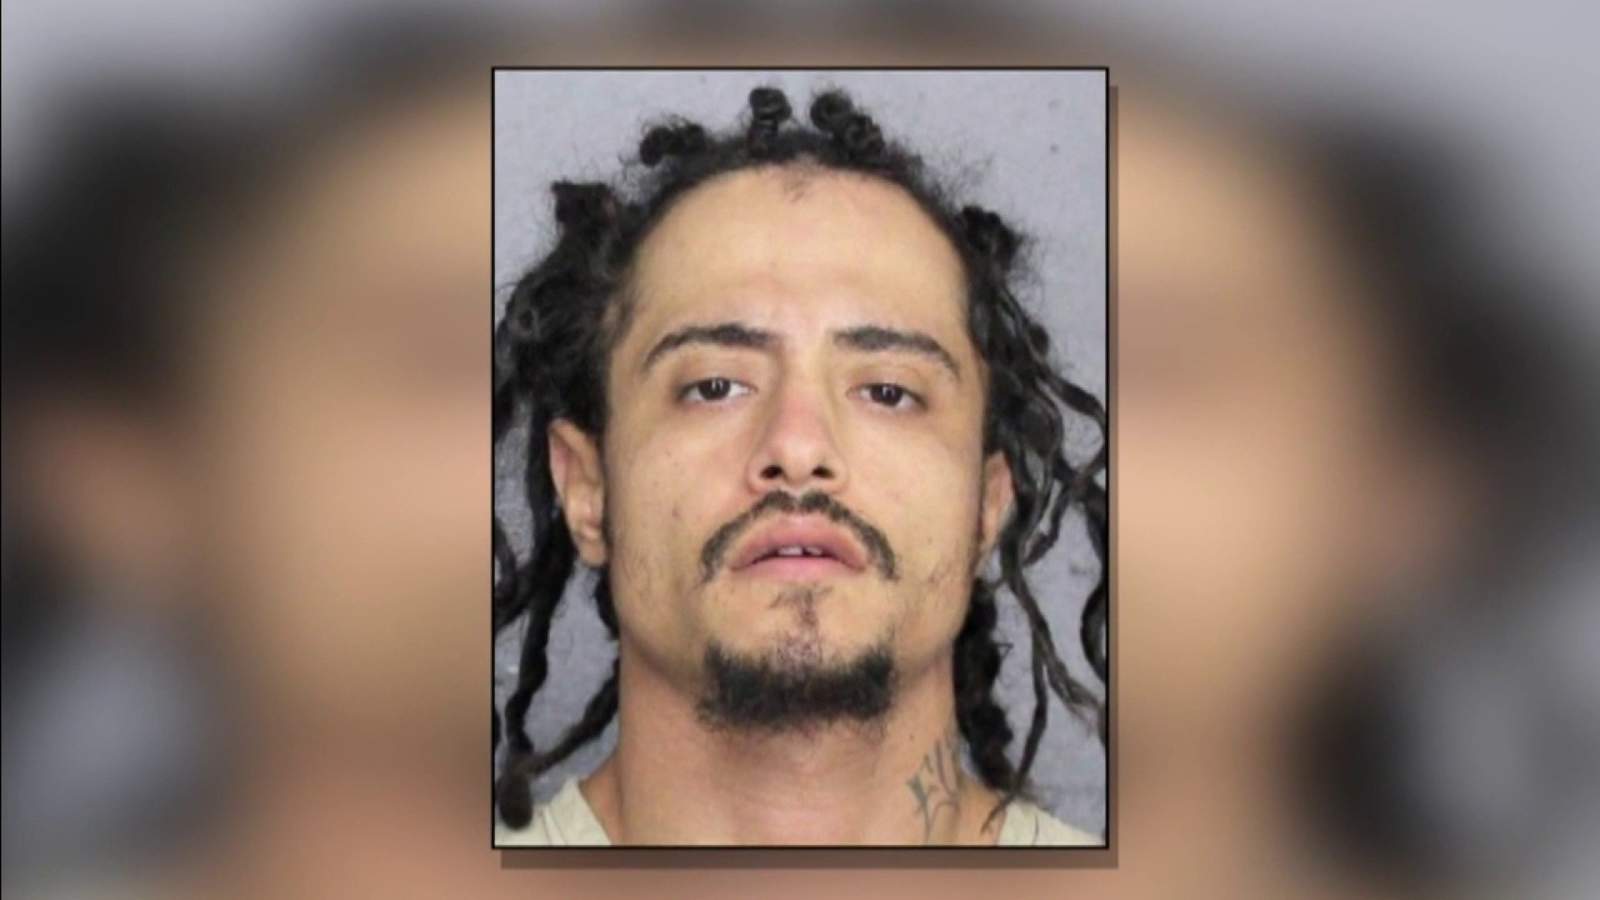 Man wanted for stealing from 40+ stores up and down South Florida, detectives say